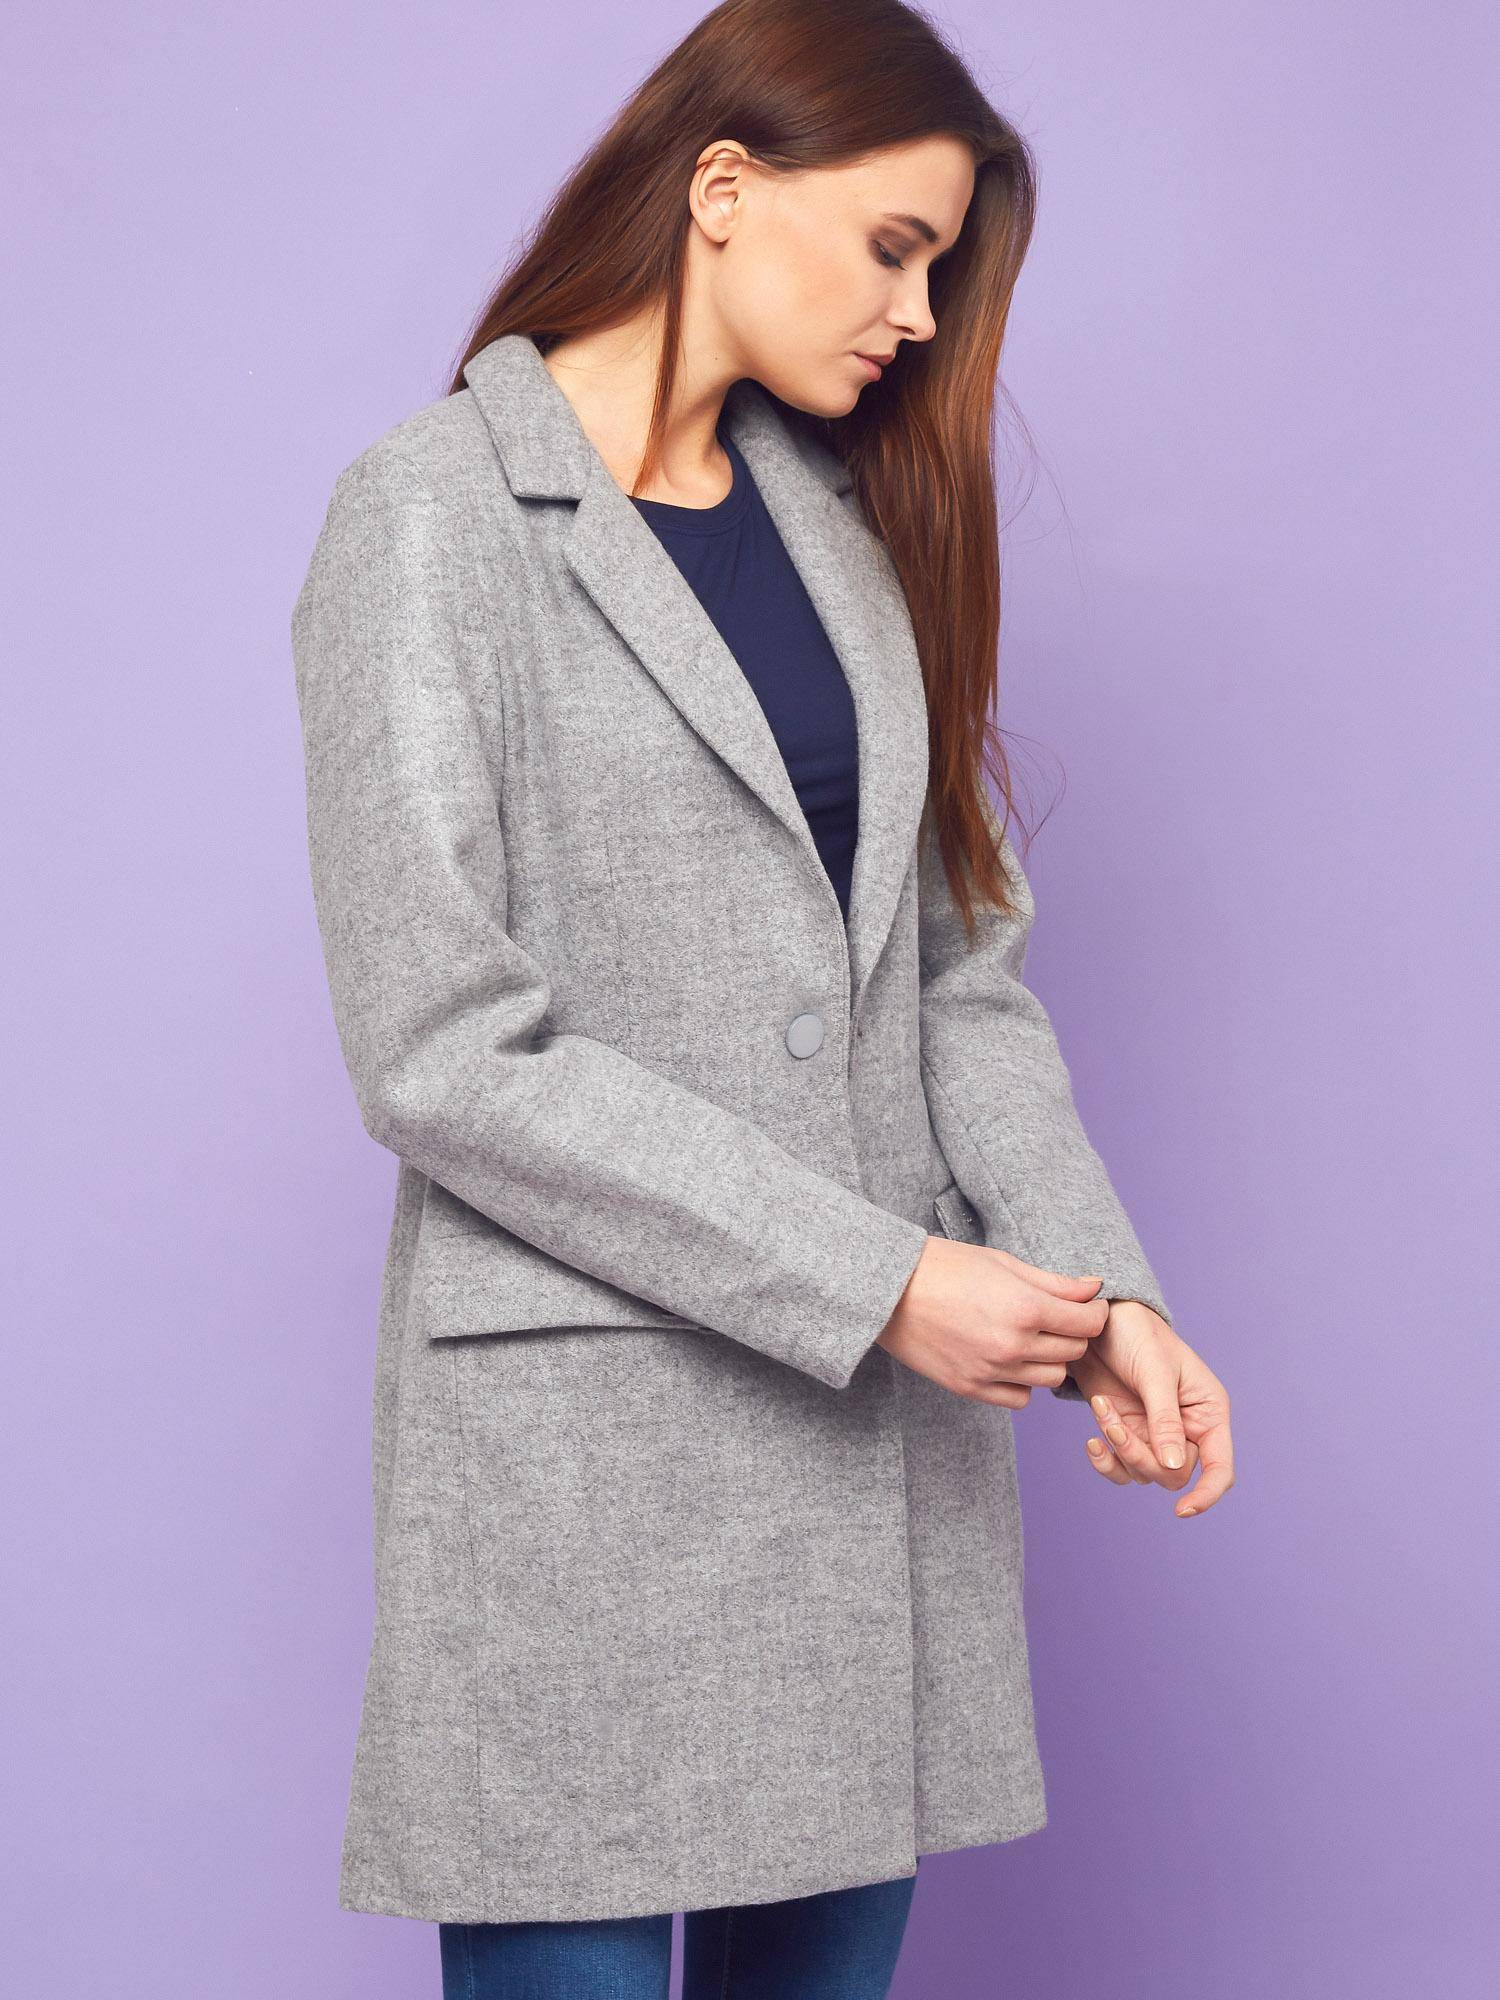 Uplander coat with flaps at the pockets grey